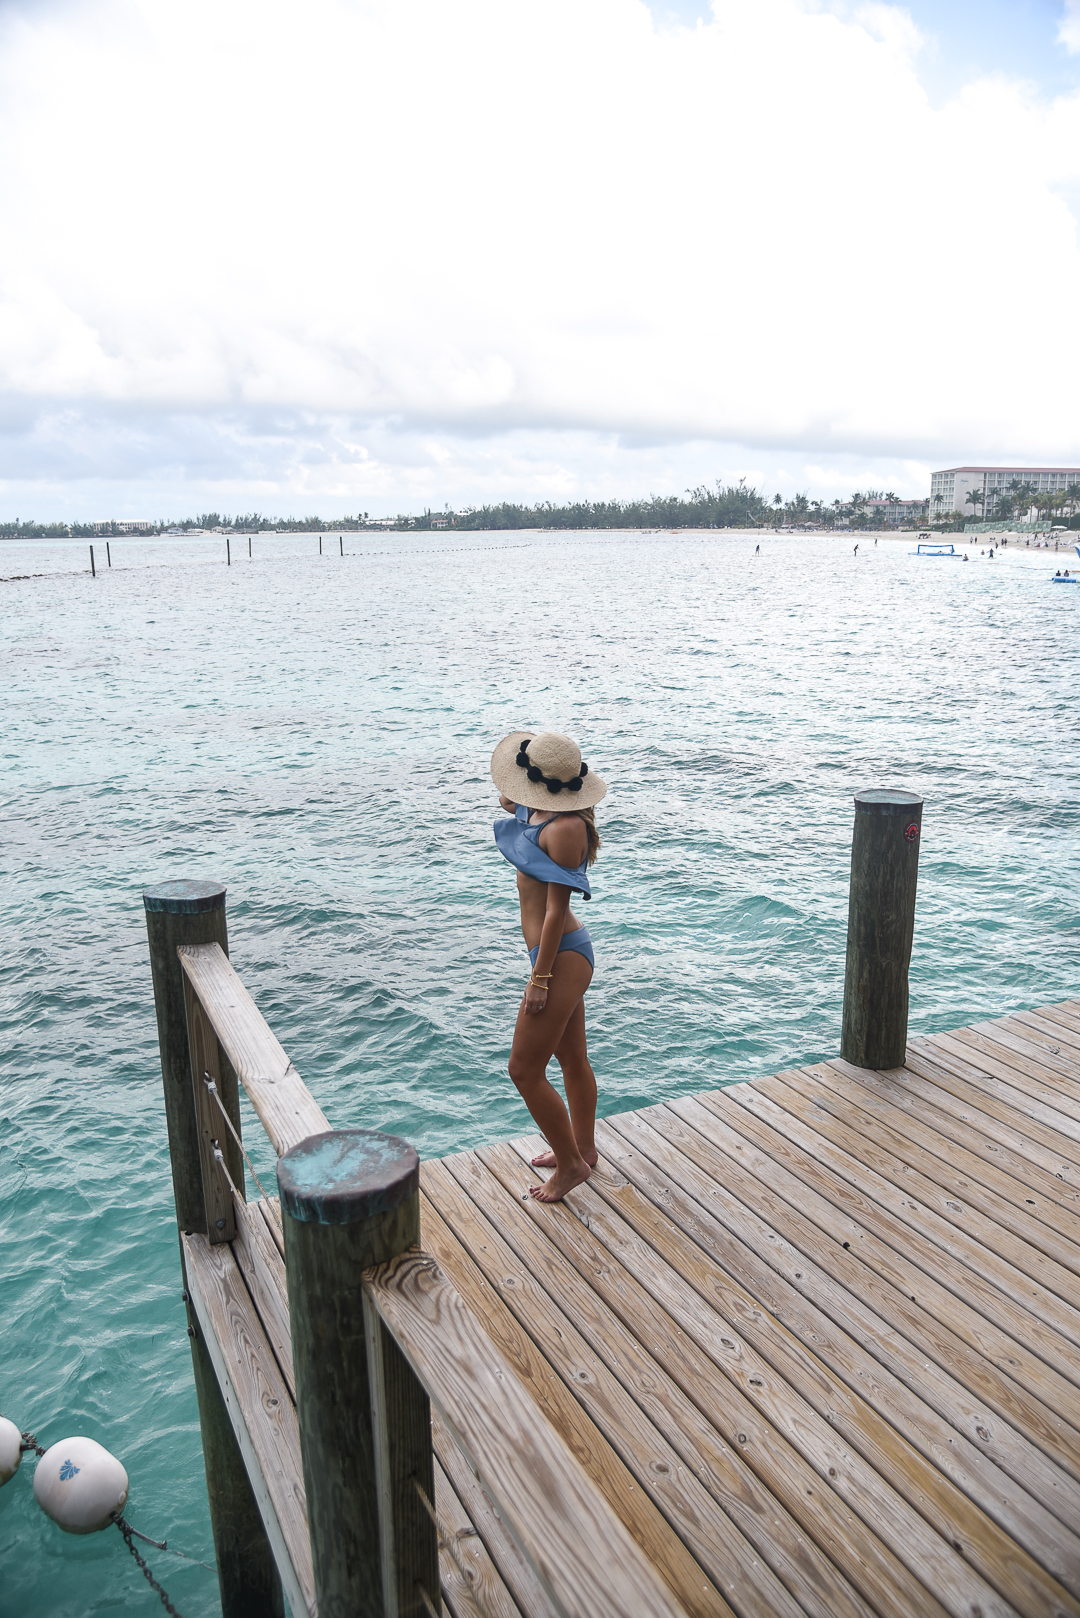 becca swimwear in the bahamas - baha mar resort review in the bahamas by popular Chicago travel blogger Visions of Vogue